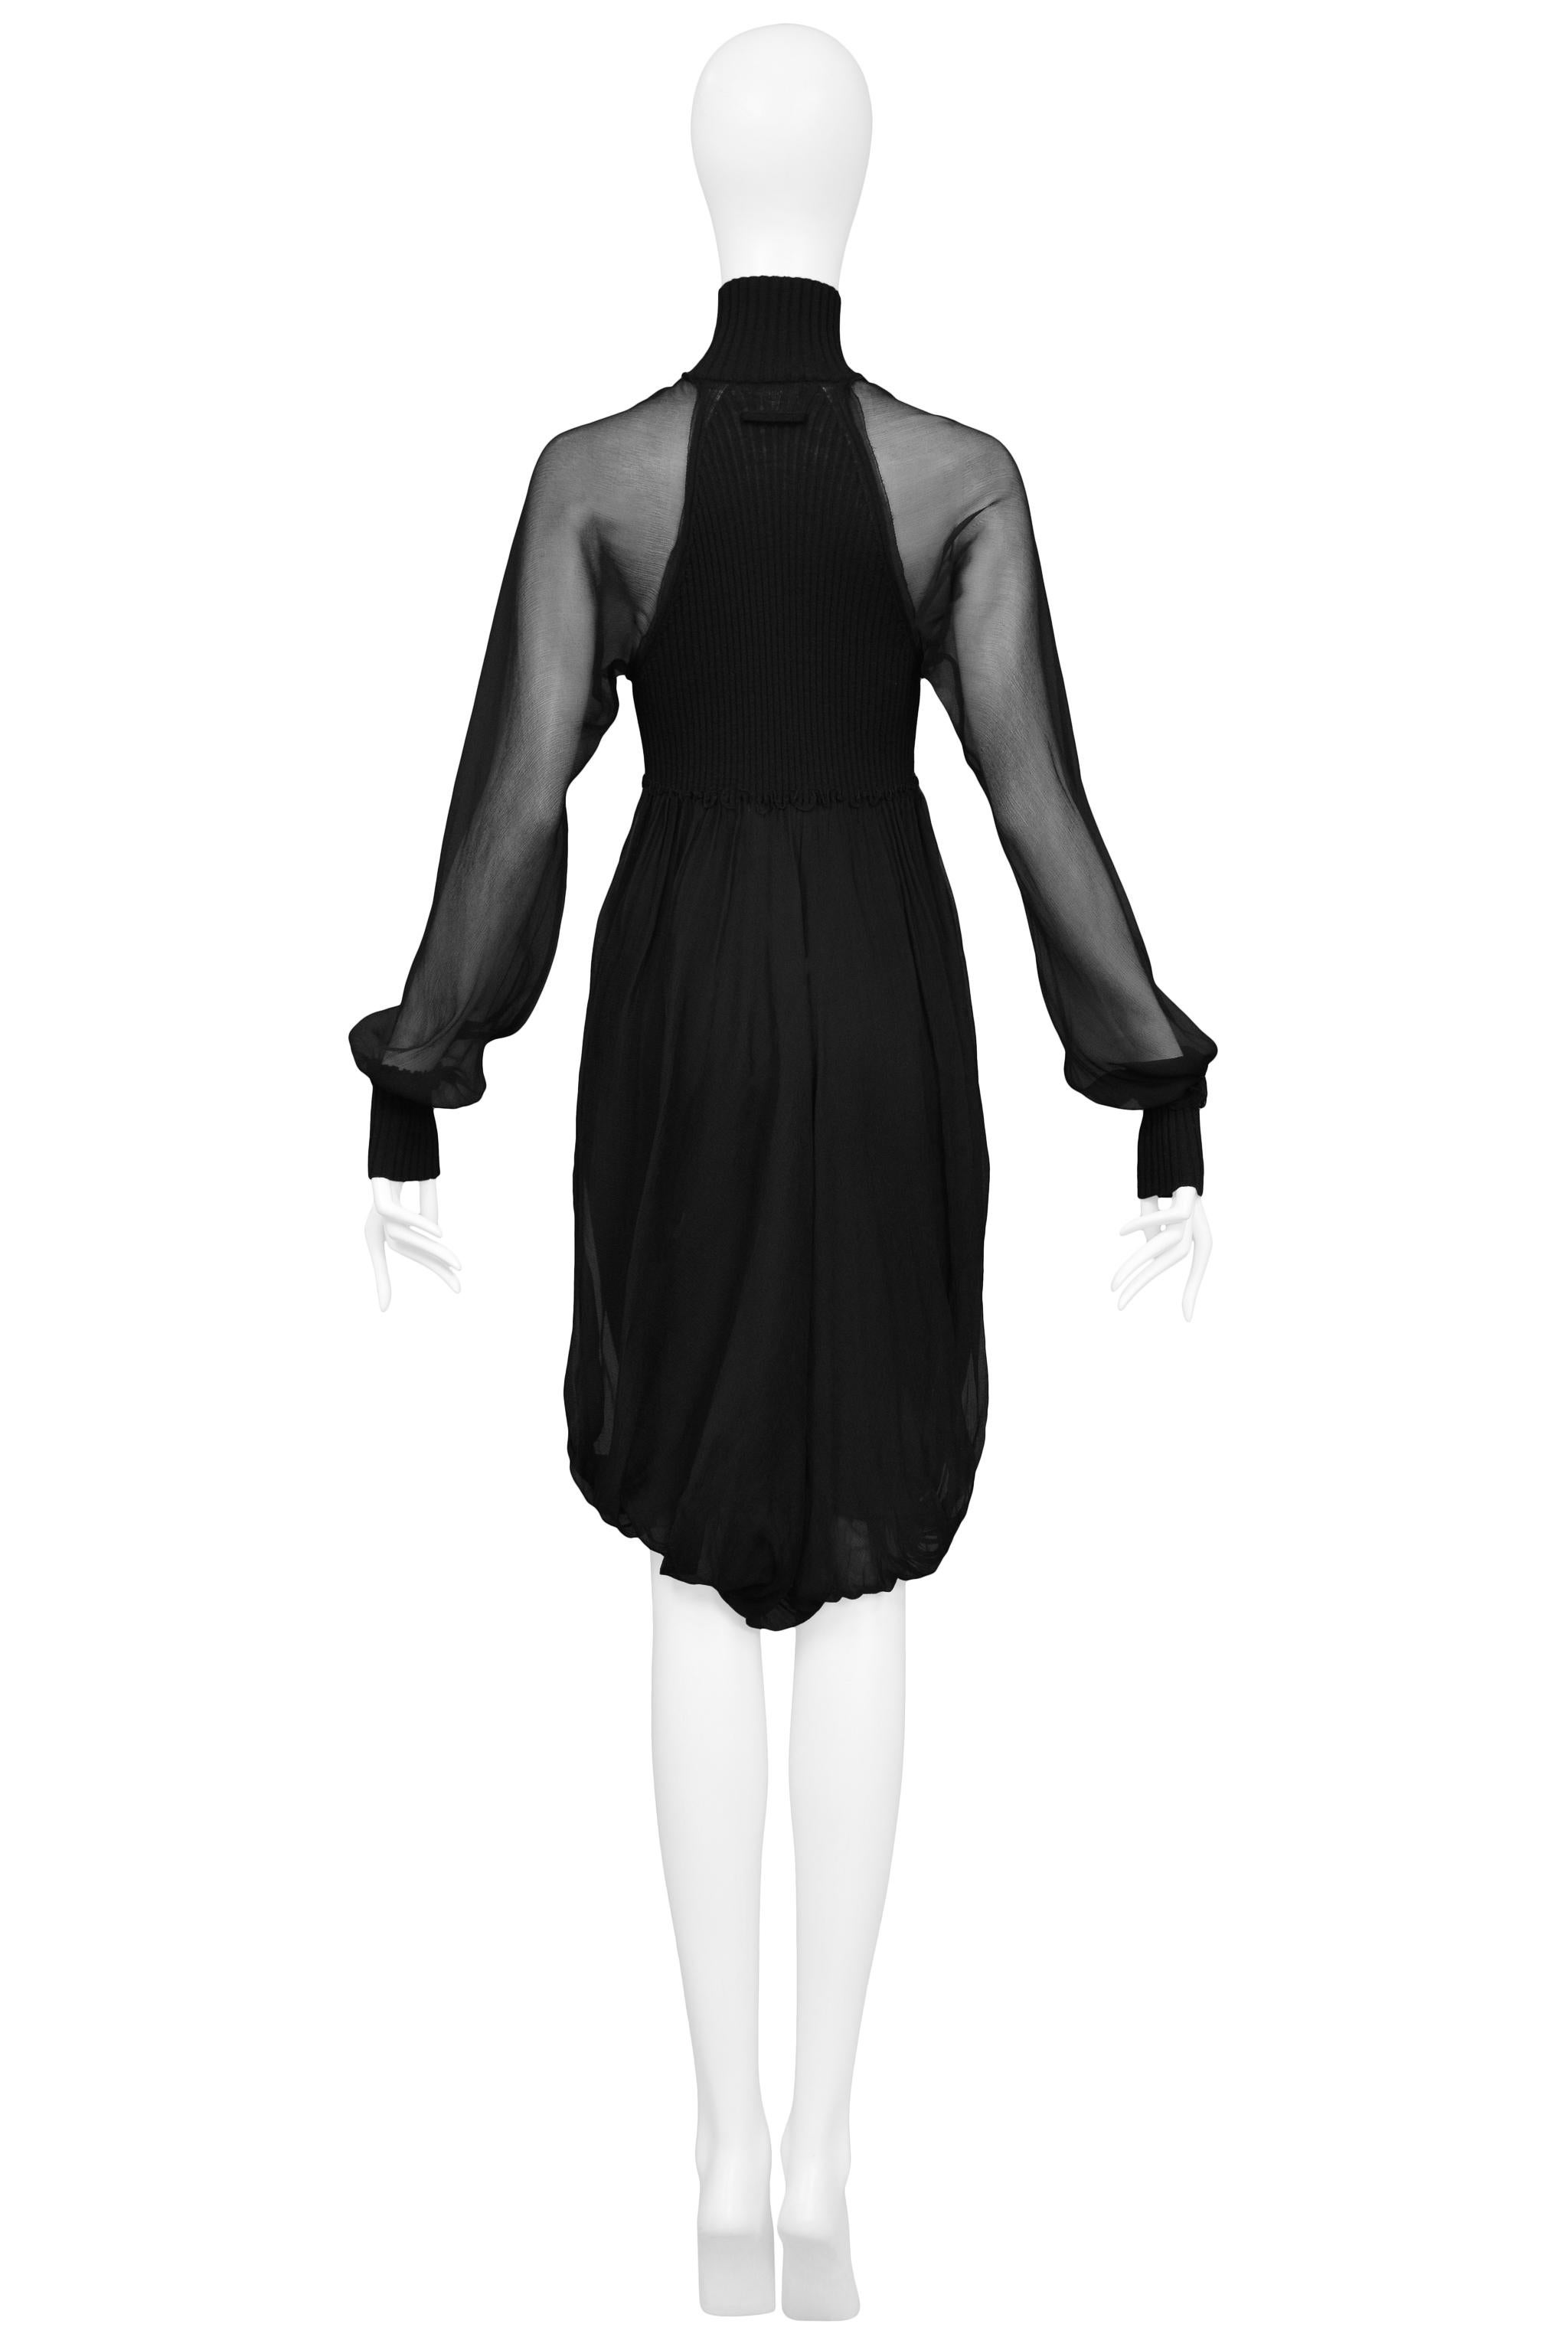 Jean Paul Gaultier Black Knit Illusion Dress With Chiffon Overlay & Sleeves For Sale 1